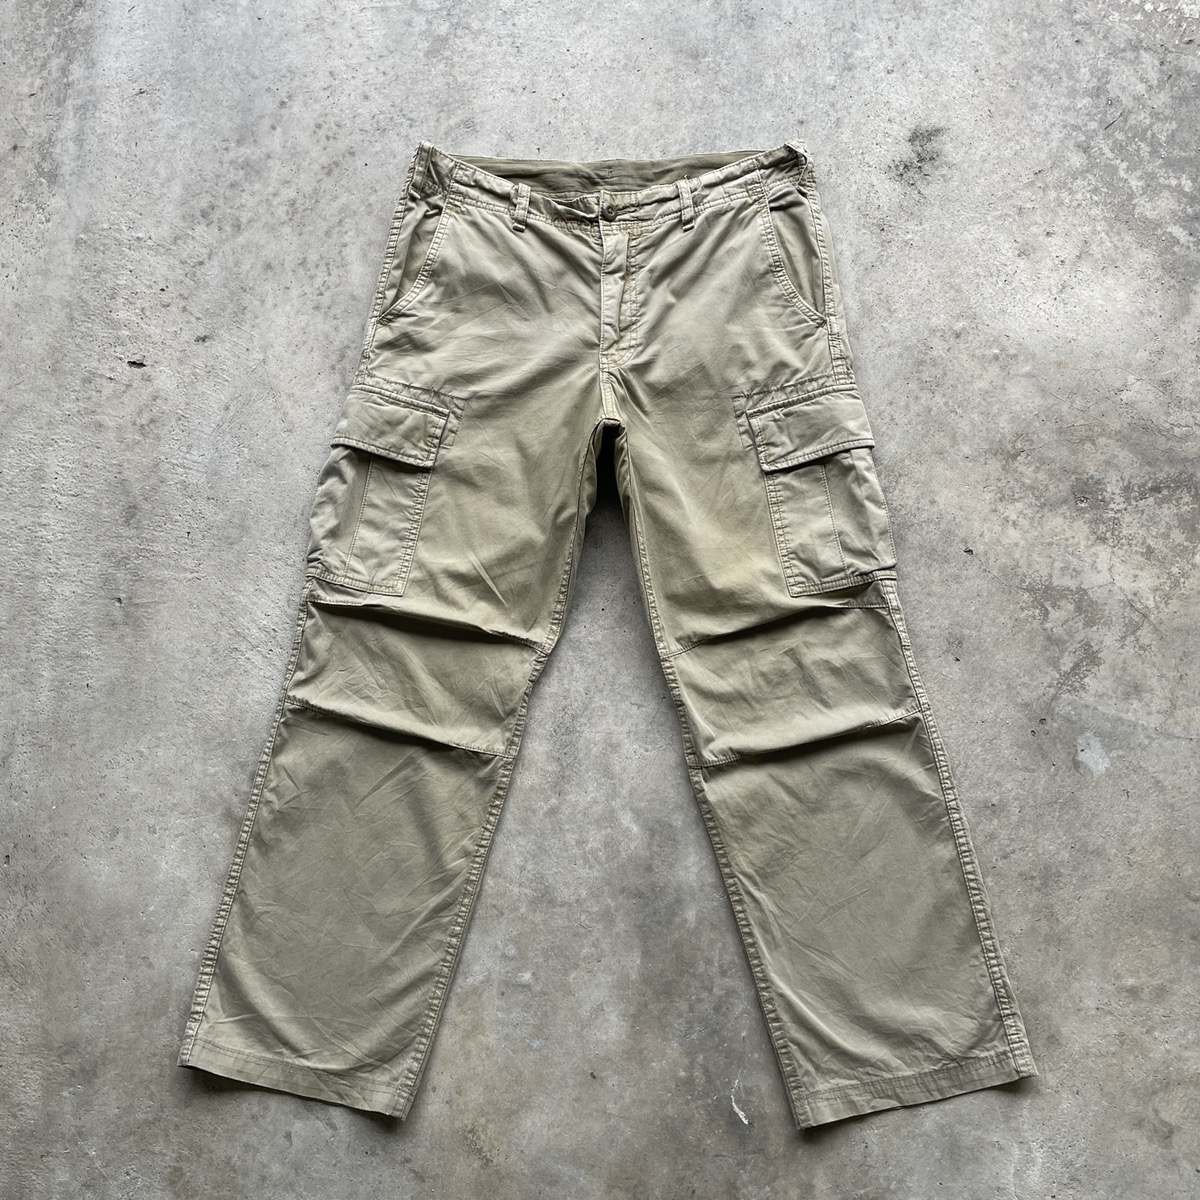 Vintage - Japanese Brand Faded Multipocket Tactical Cargo Pants W33x28 - 2